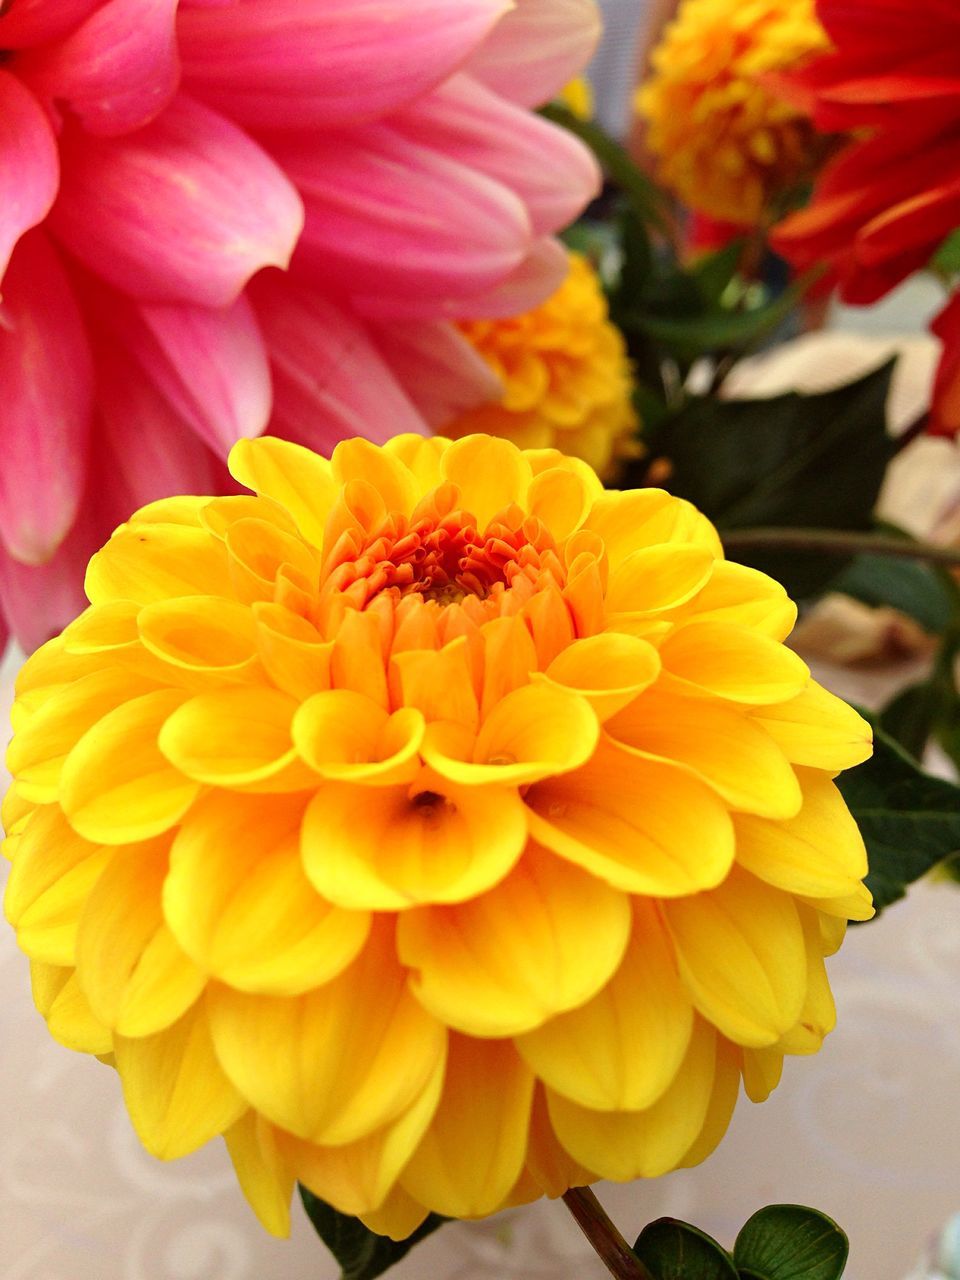 freshness, flower, petal, fragility, flower head, close-up, beauty in nature, yellow, nature, vibrant color, springtime, growth, dahlia, selective focus, macro, focus on foreground, blossom, plant, in bloom, botany, full frame, extreme close-up, soft focus